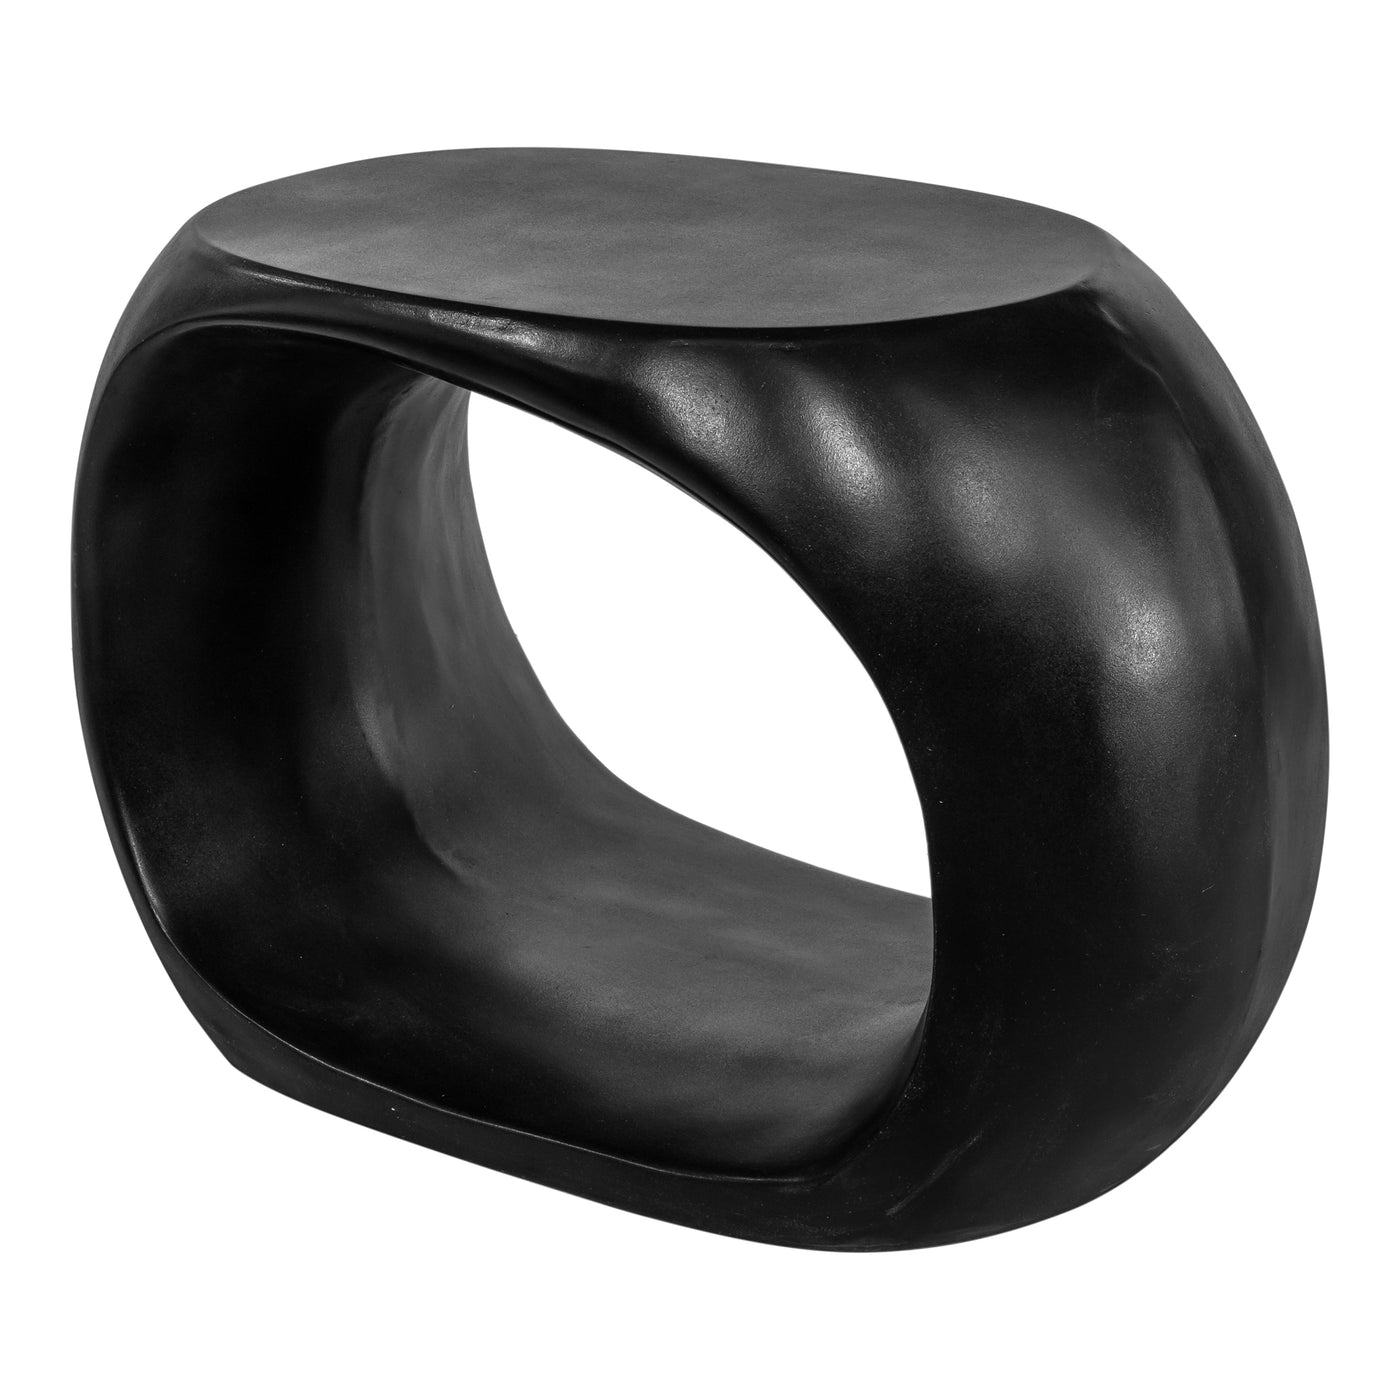 The blend of art and function into sculptural seating. This monolithic indoor or outdoor stool design is a work of art, re...